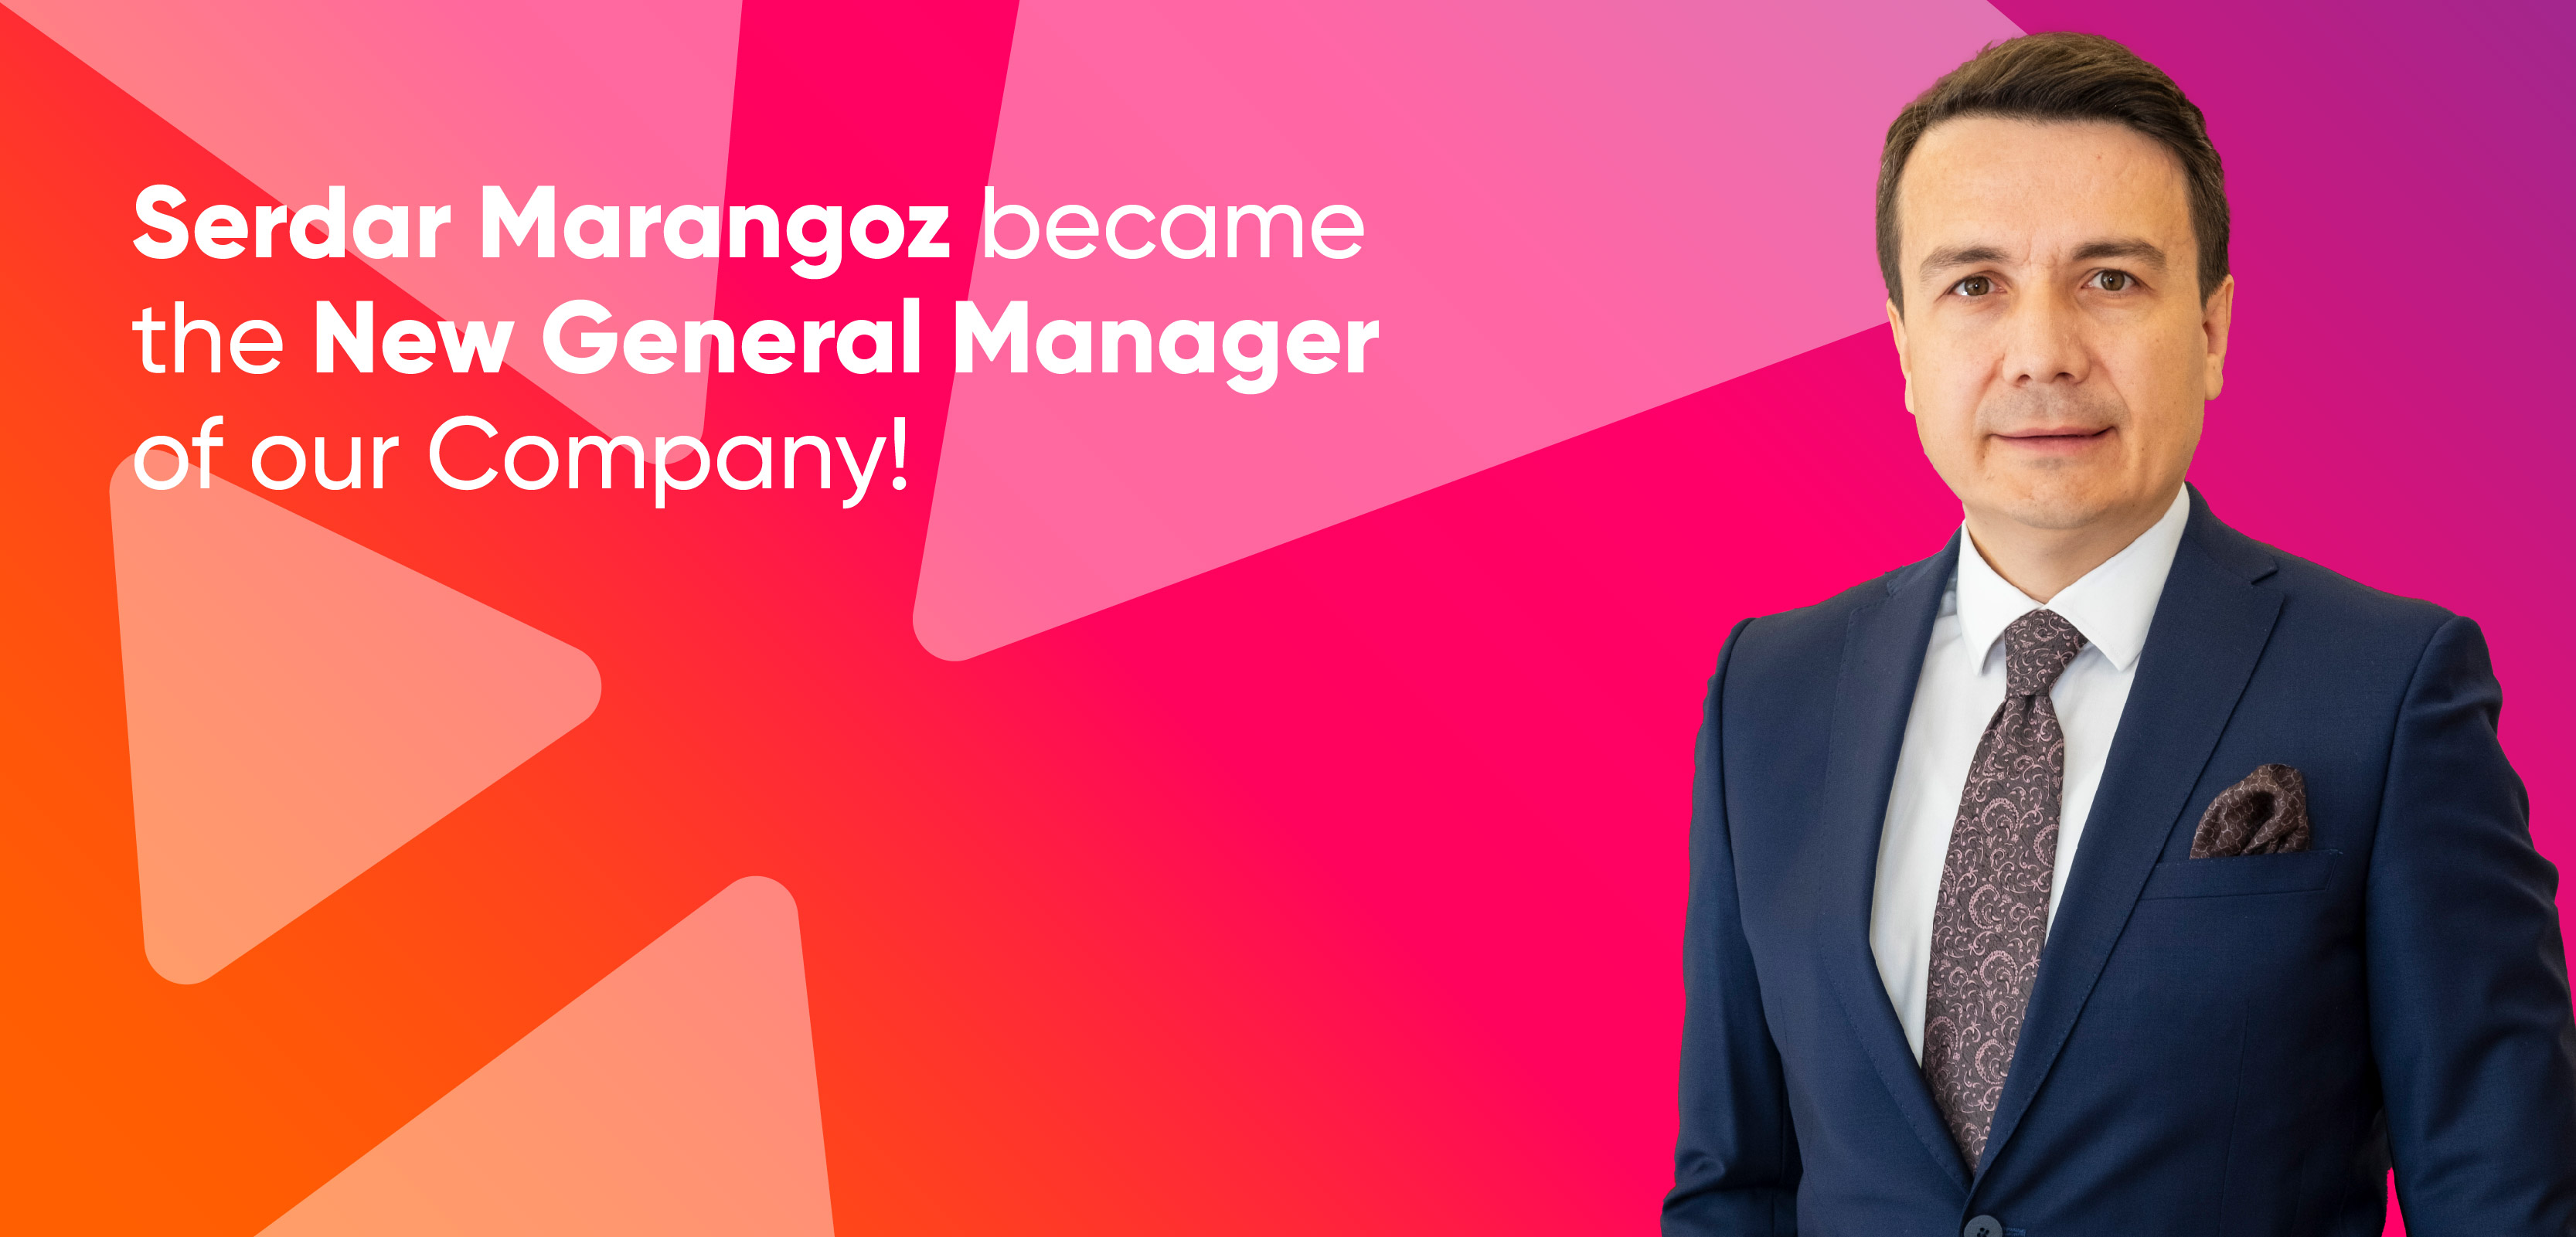 Serdar Marangoz became the New General Manager of our Company!